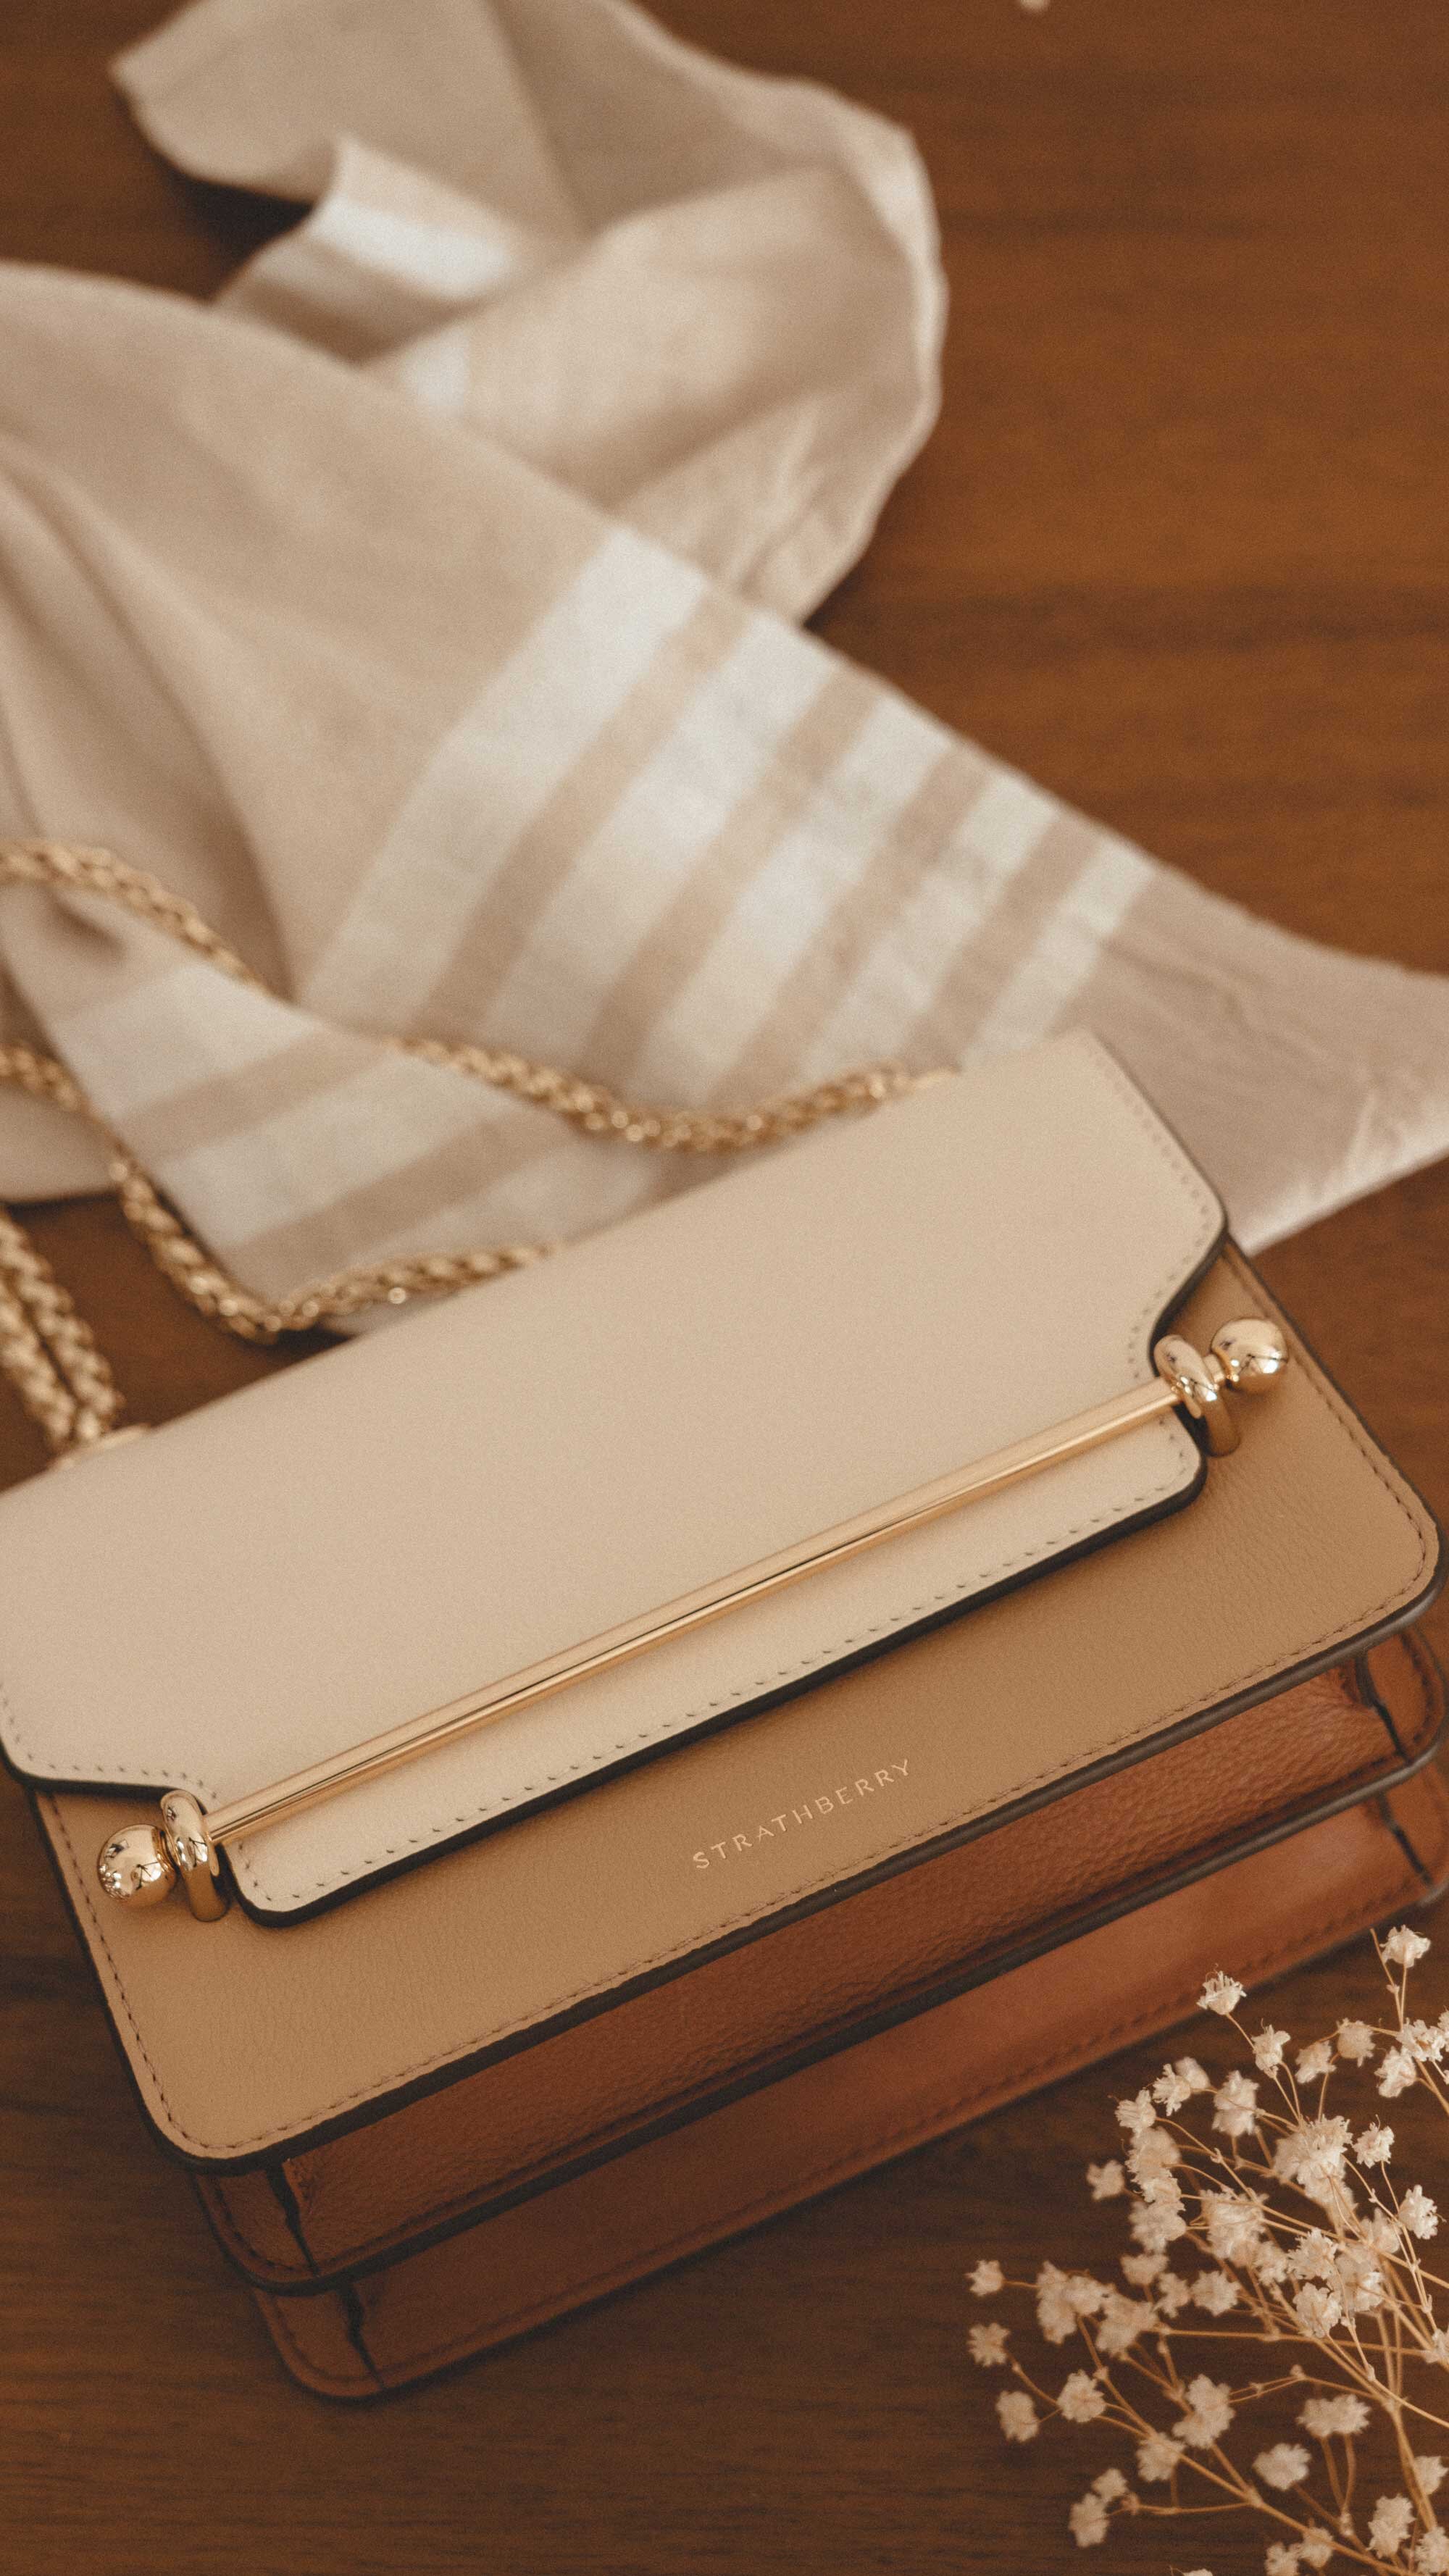 Strathberry East/West Crossbody Bag in Vanilla/Latte with Ember Edge